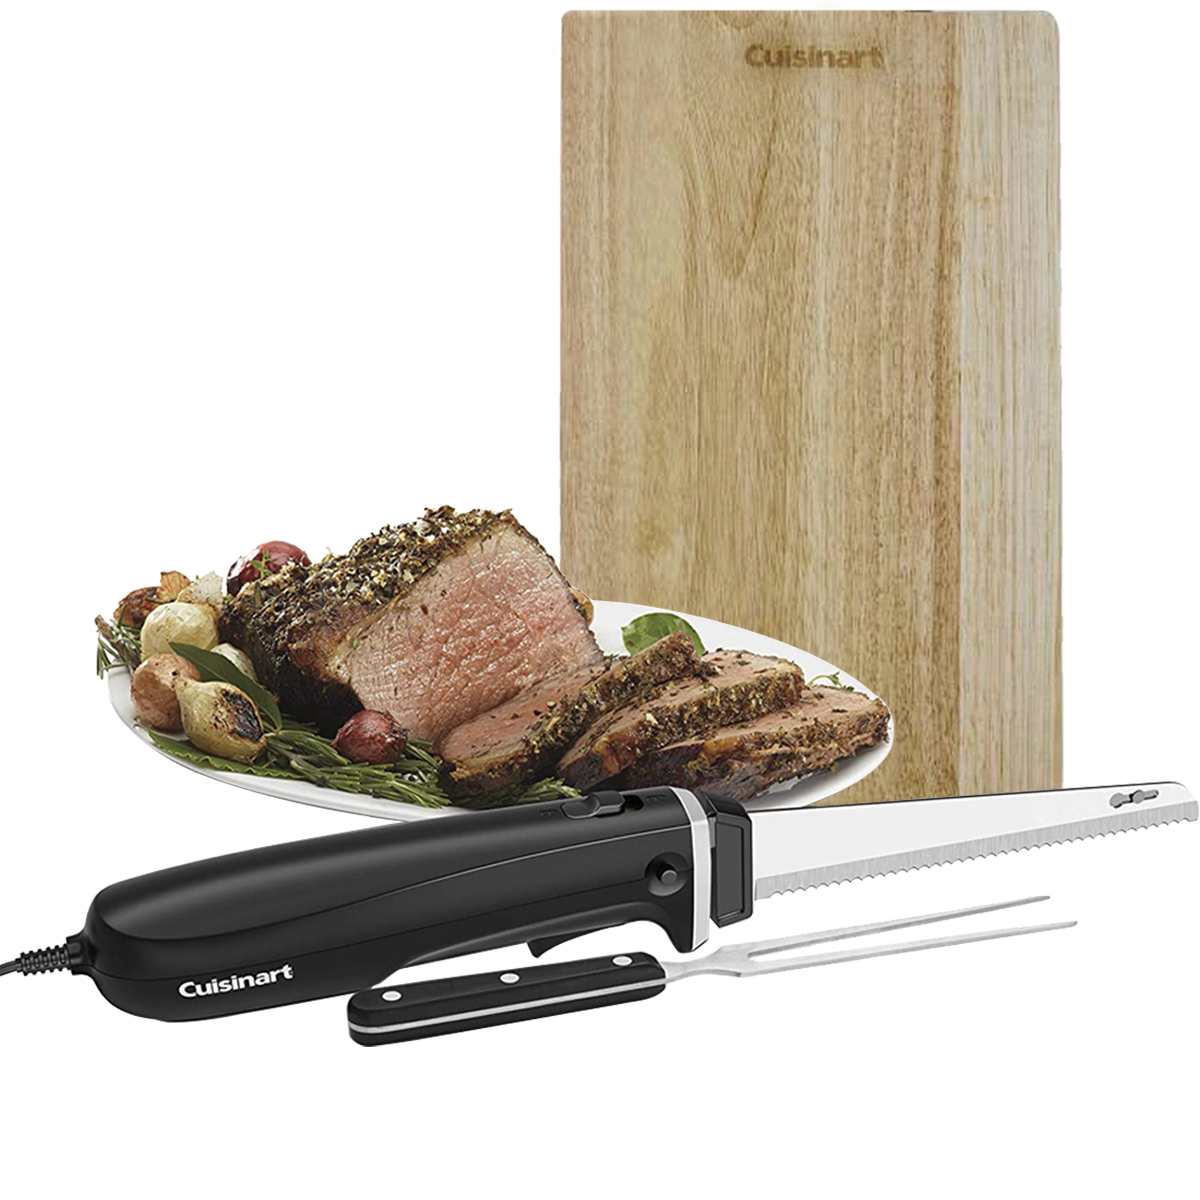 Photos - Knife / Multitool Cuisinart CEK-41 AC Electric Knife with Bamboo Cutting Board 